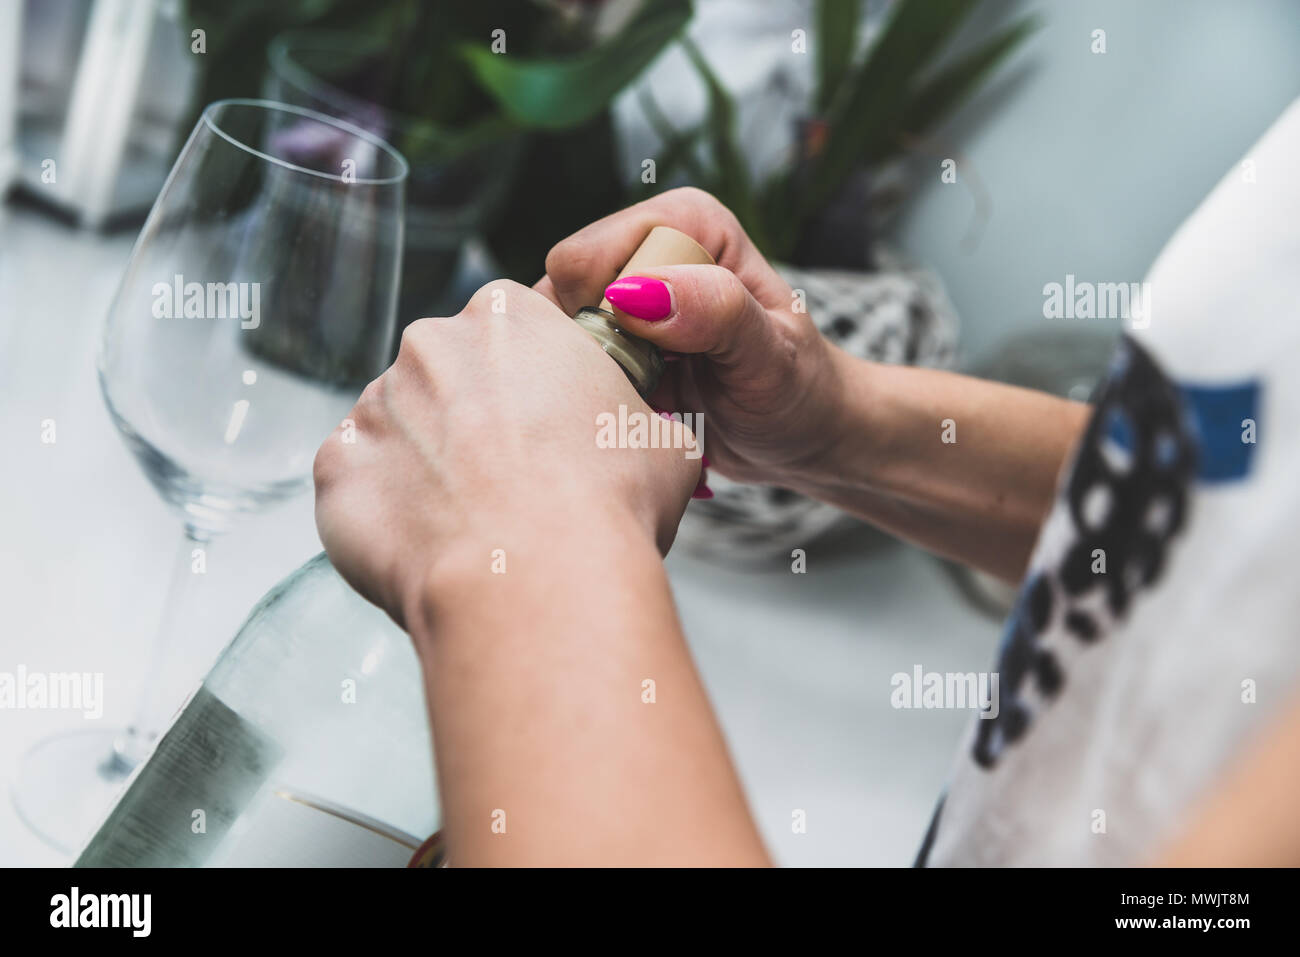 The woman is trying to open a bottle with wine, alcohol. Longing for alcohol, for wine. Alcohol problems concept. Drinking wine, party, fun, lonelines Stock Photo